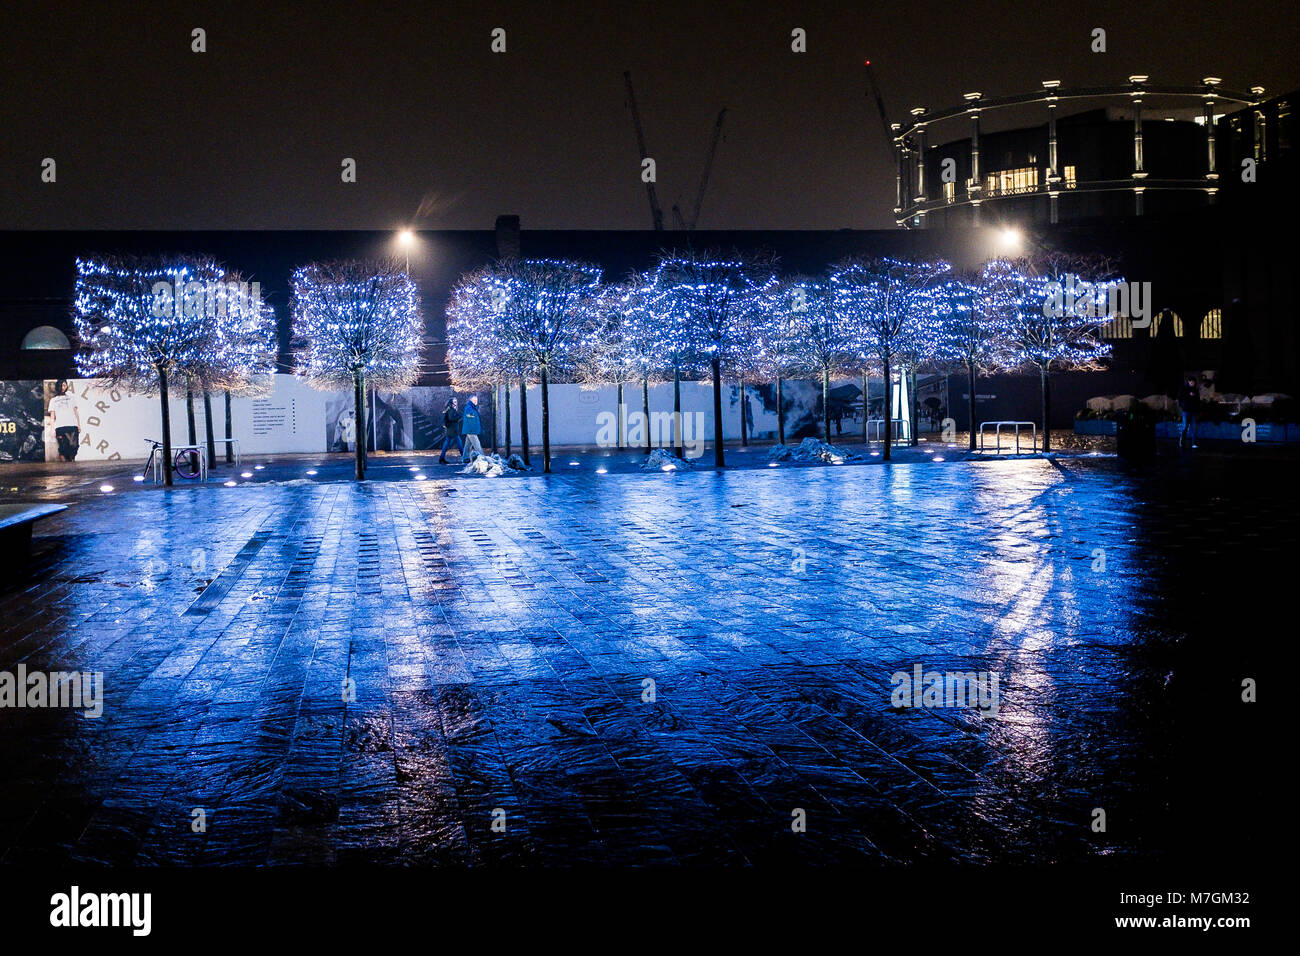 Illuminated trees at night in Granary Square in London’s Kings Cross with Gasholder Park in the background Stock Photo